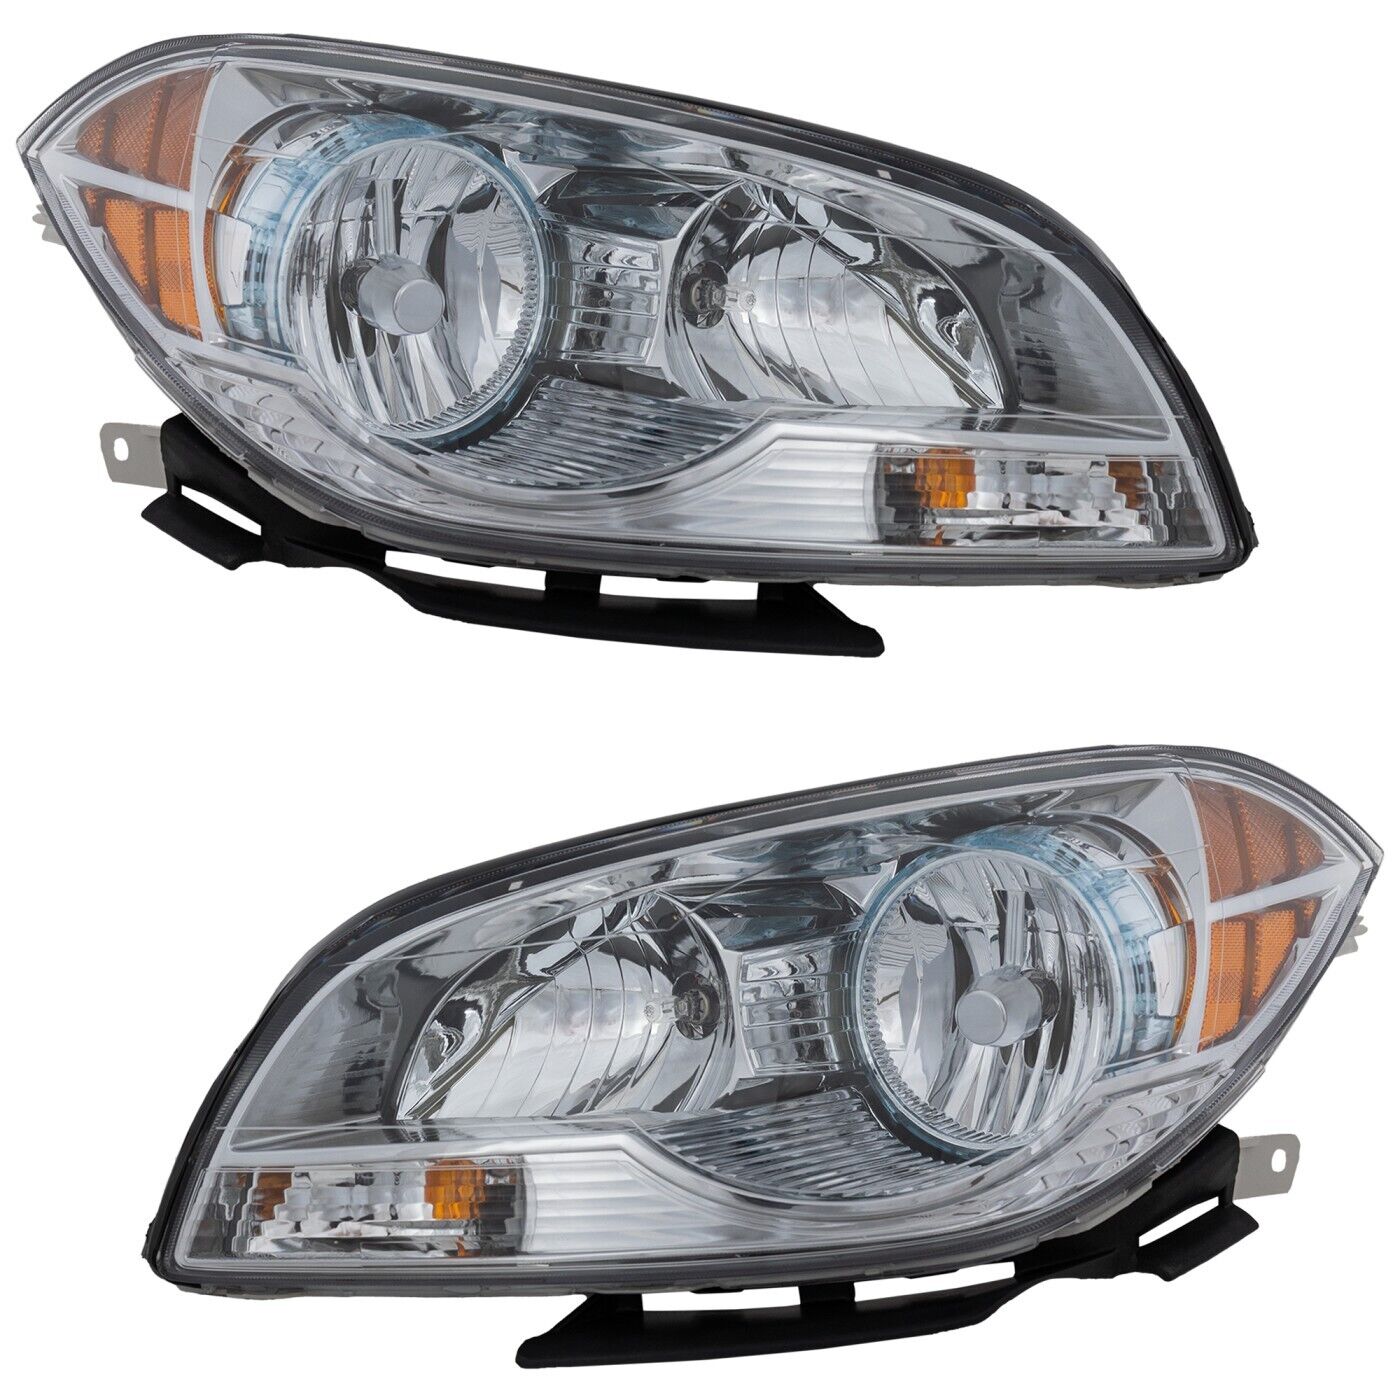 Headlight Set For 2008-2012 Chevrolet Malibu Left and Right With Bulb 2Pc